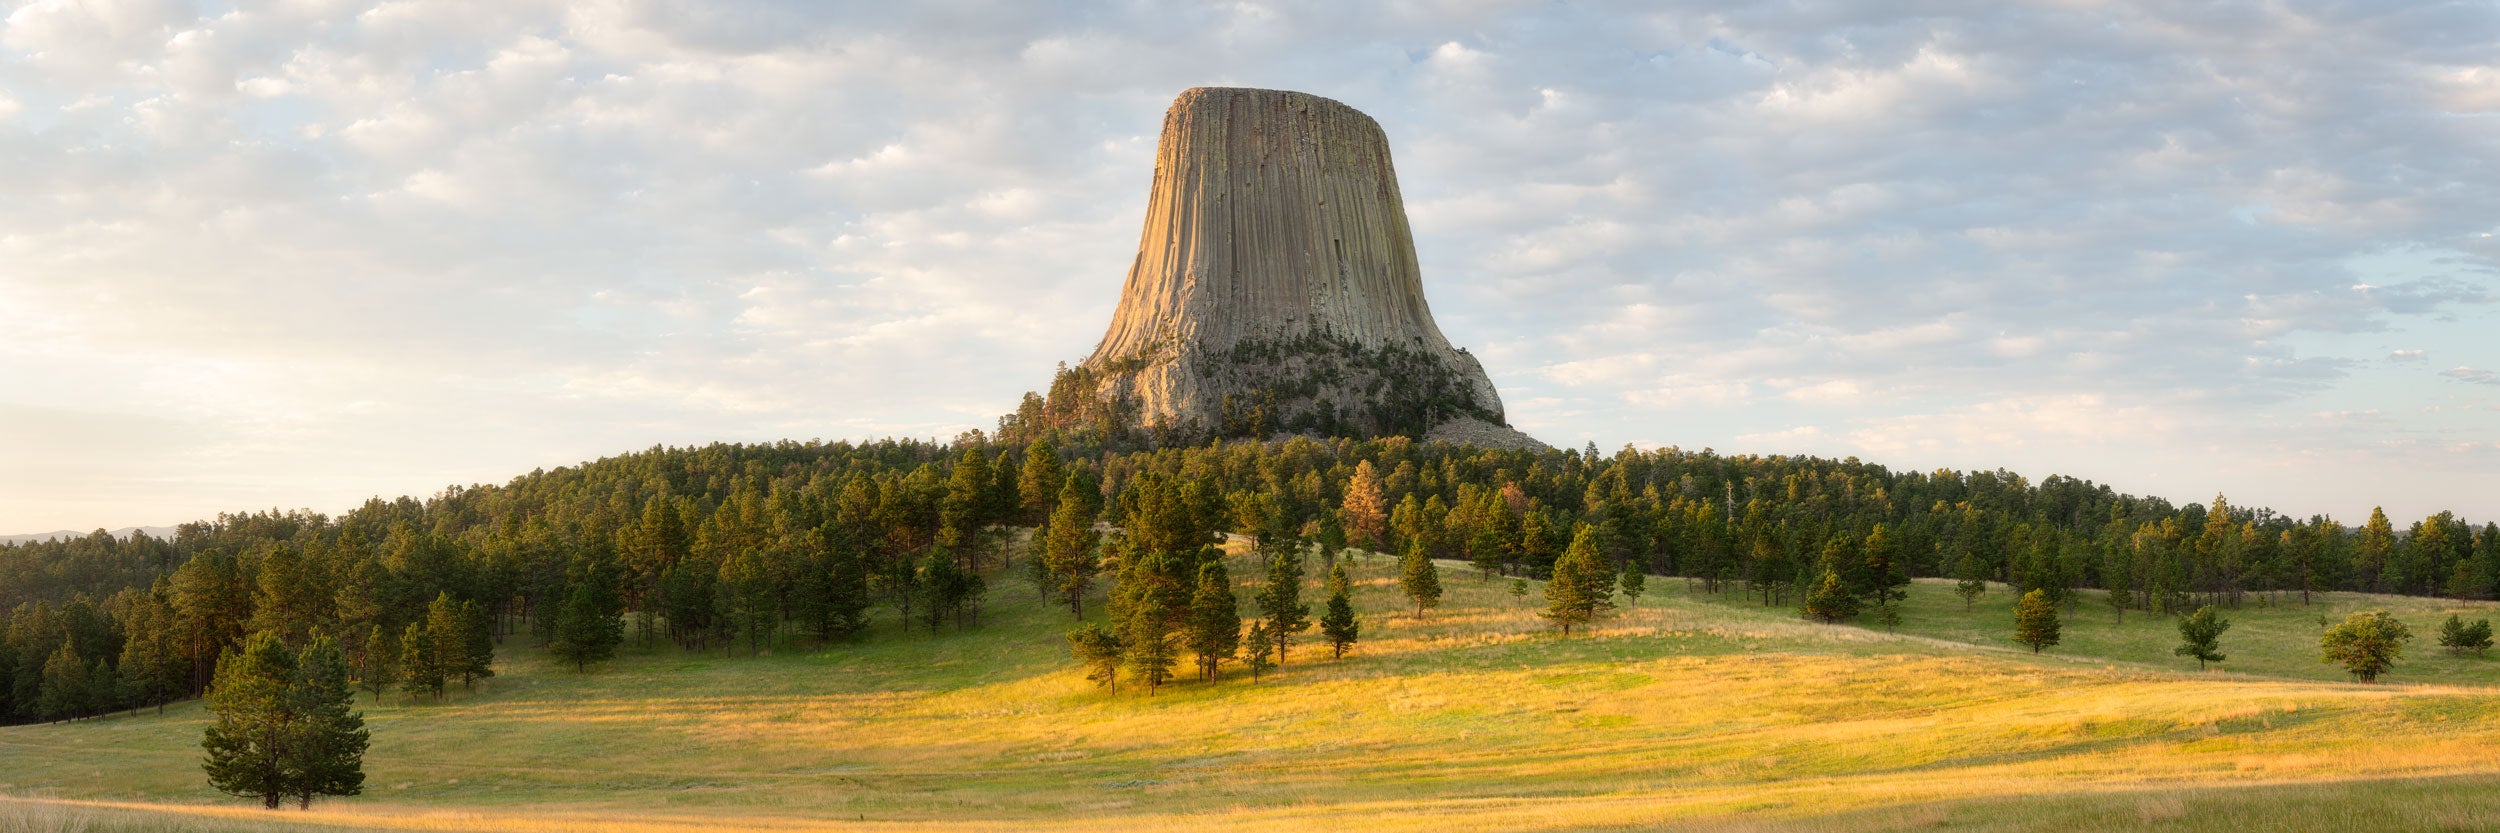 A Lars Gesing fine art nature photograph of Devil's Tower in Wyoming.